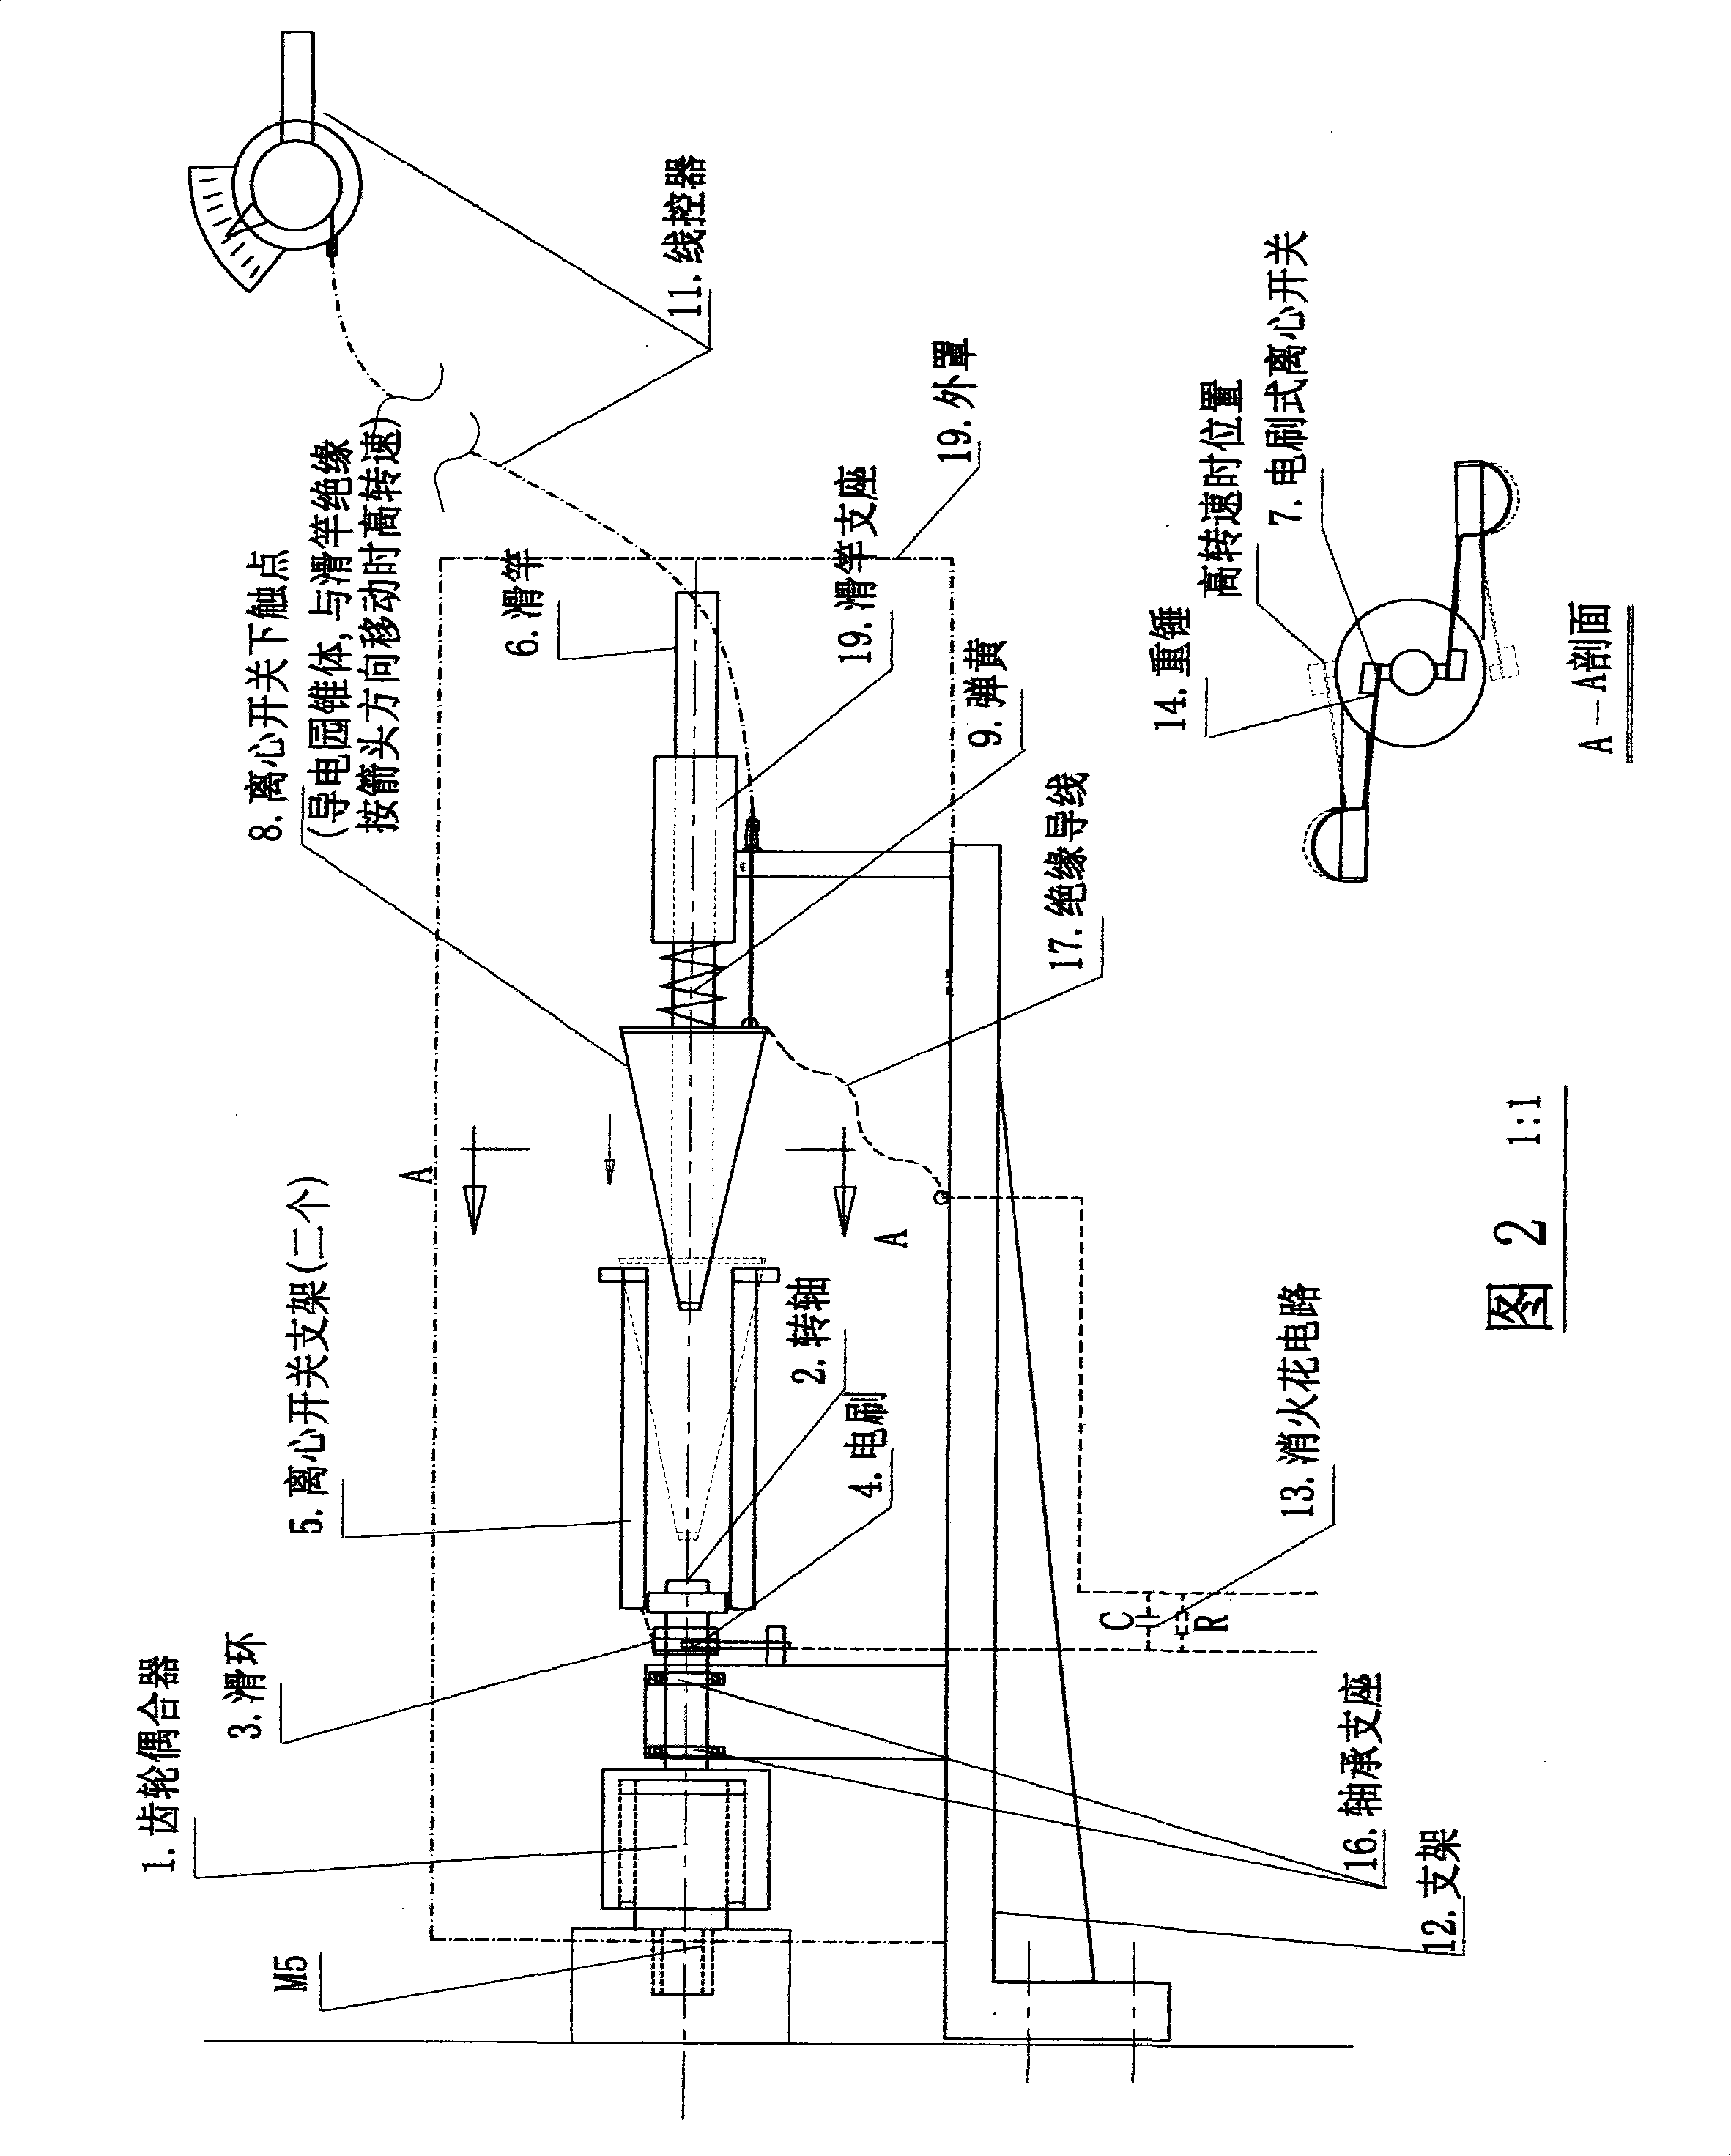 Acentric timing and speed-stabilized motor